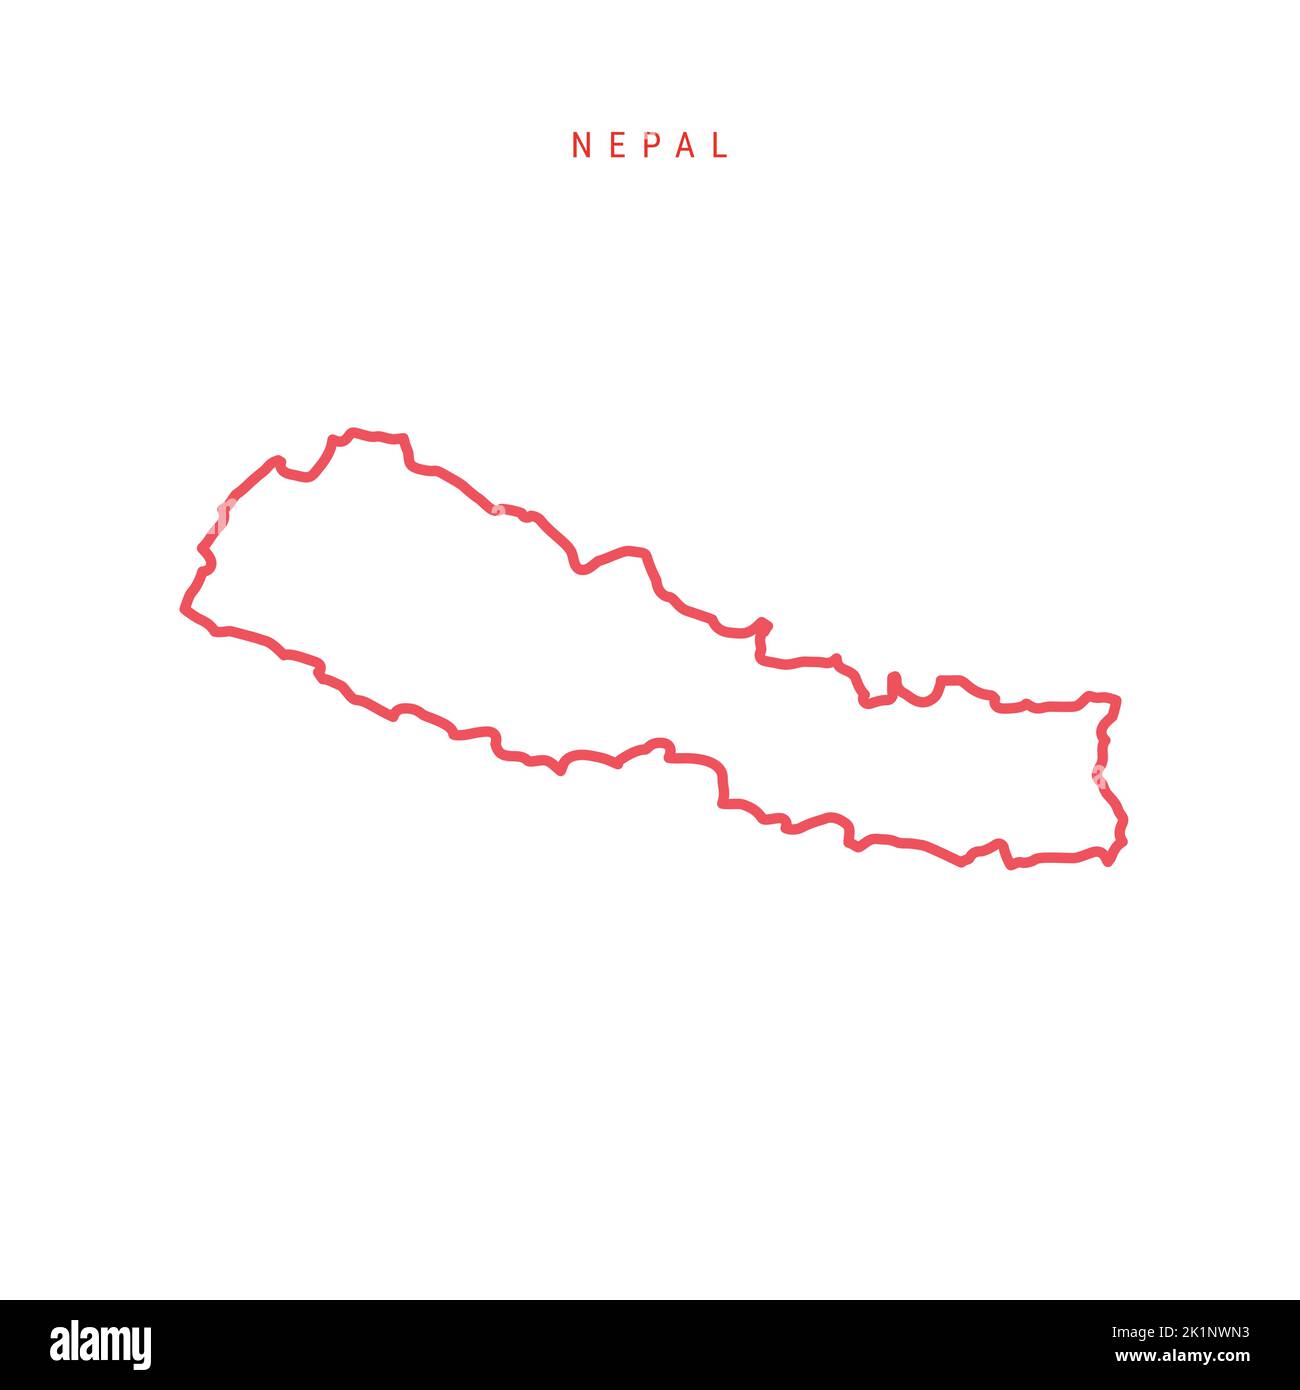 Nepal editable outline map. Nepali red border. Country name. Adjust line weight. Change to any color. Vector illustration. Stock Vector